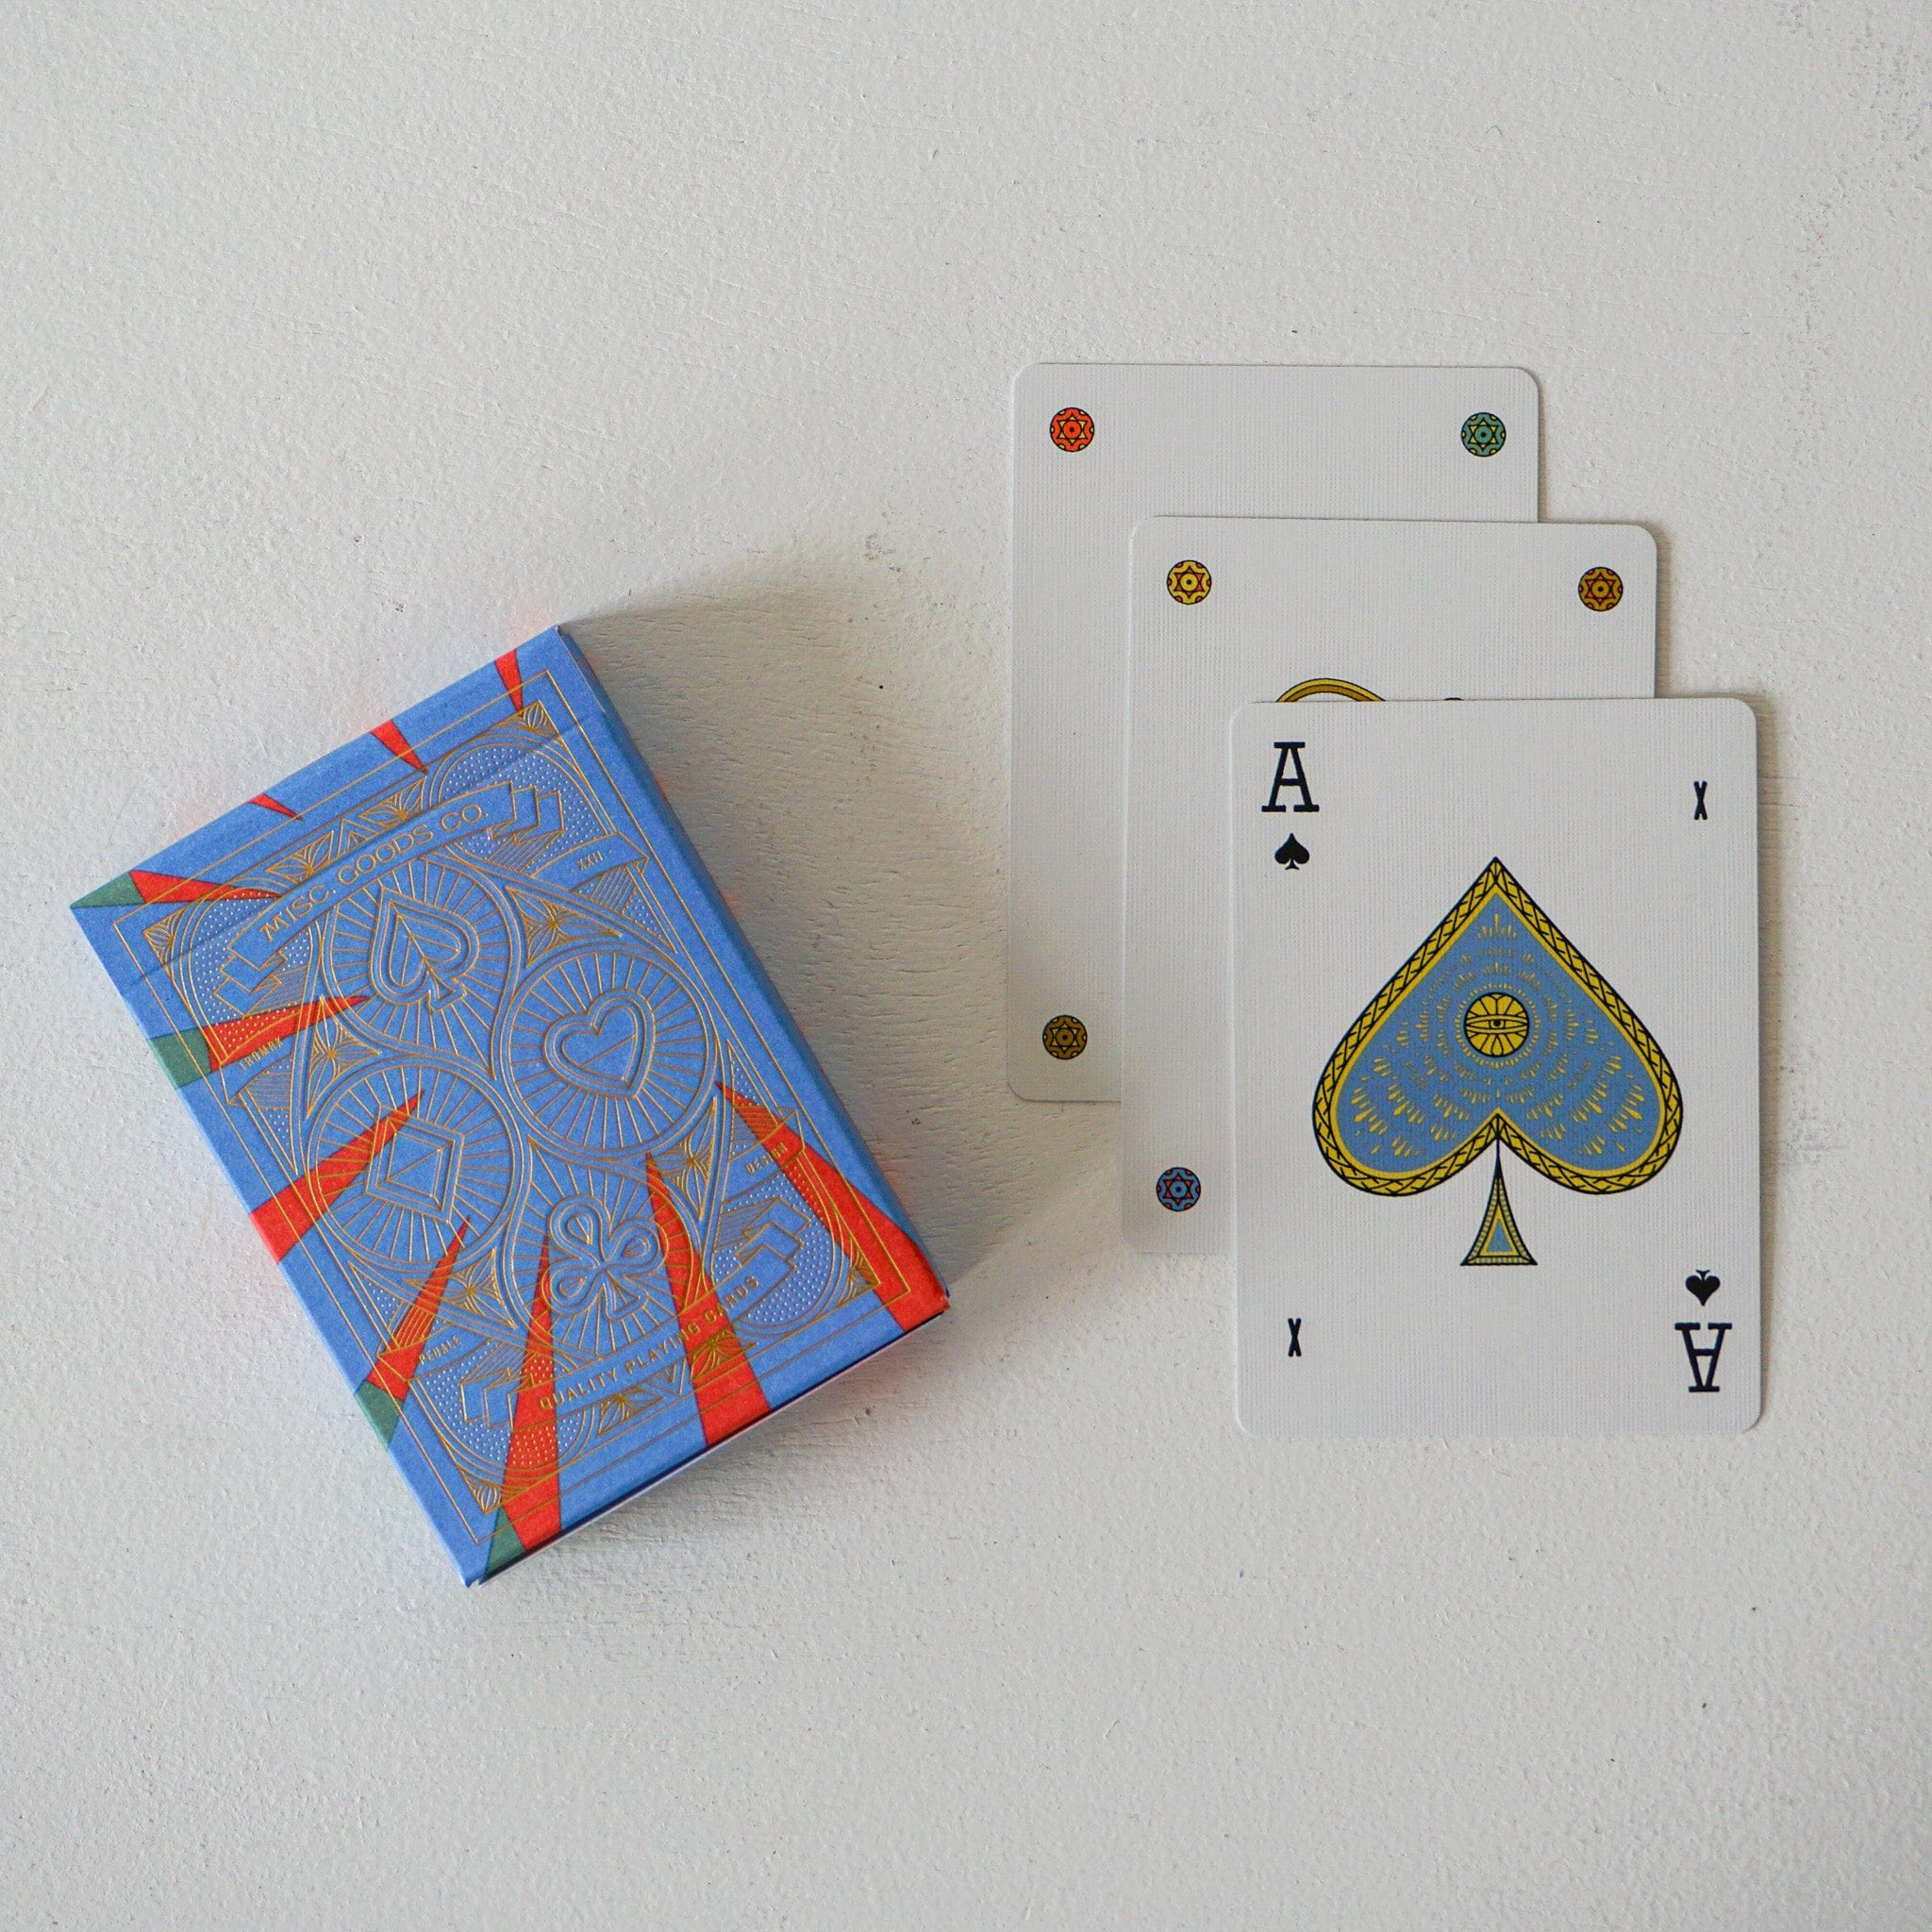 Misc Goods Co. Card Games Playing Cards - Blue, Red, Green